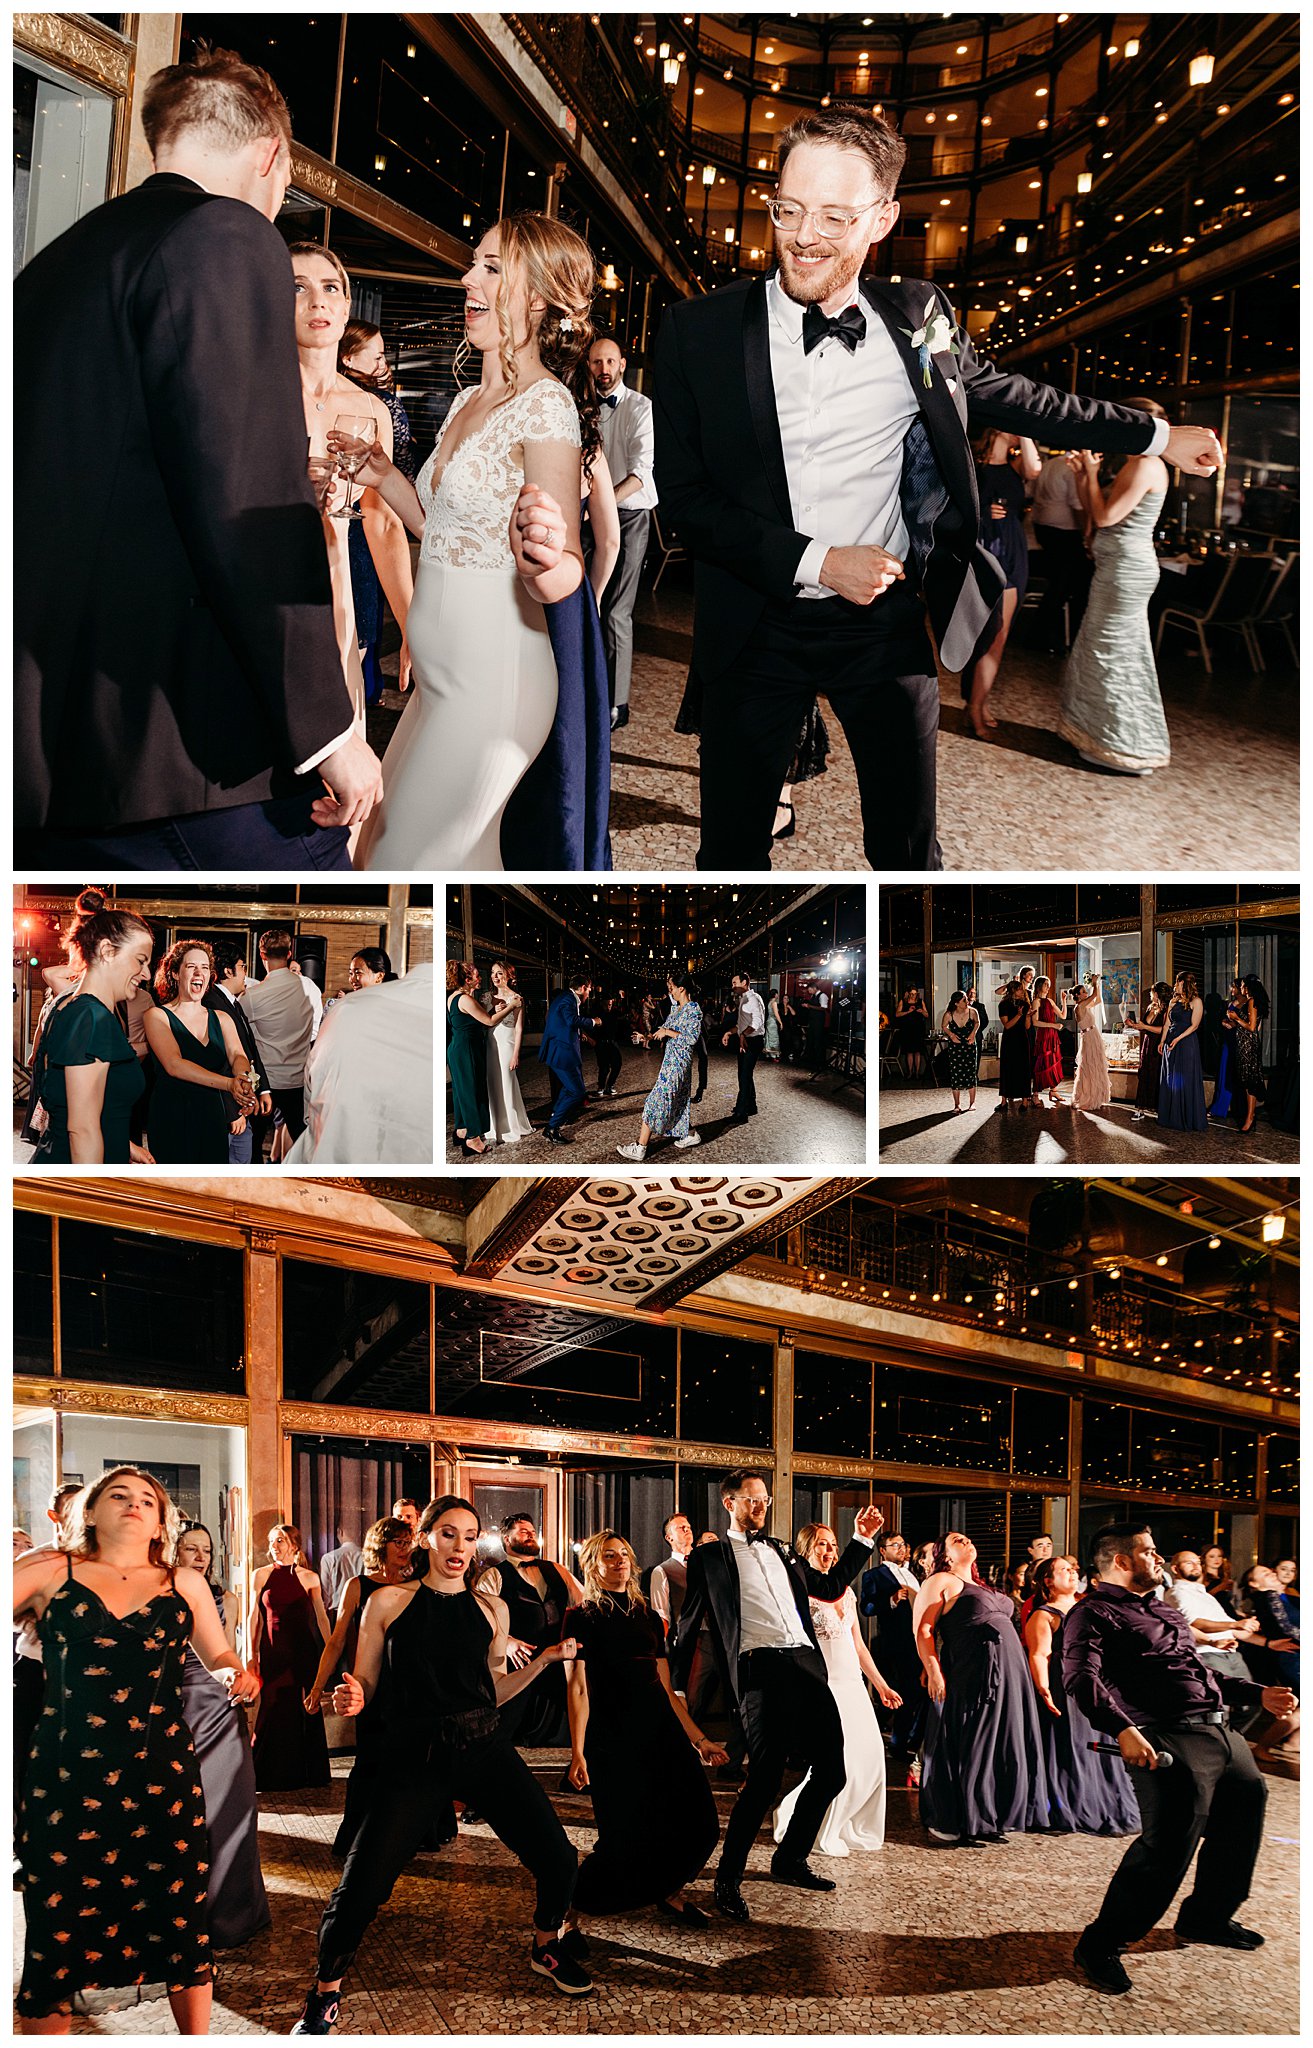 Guests dance the night away at Cleveland reception hall.